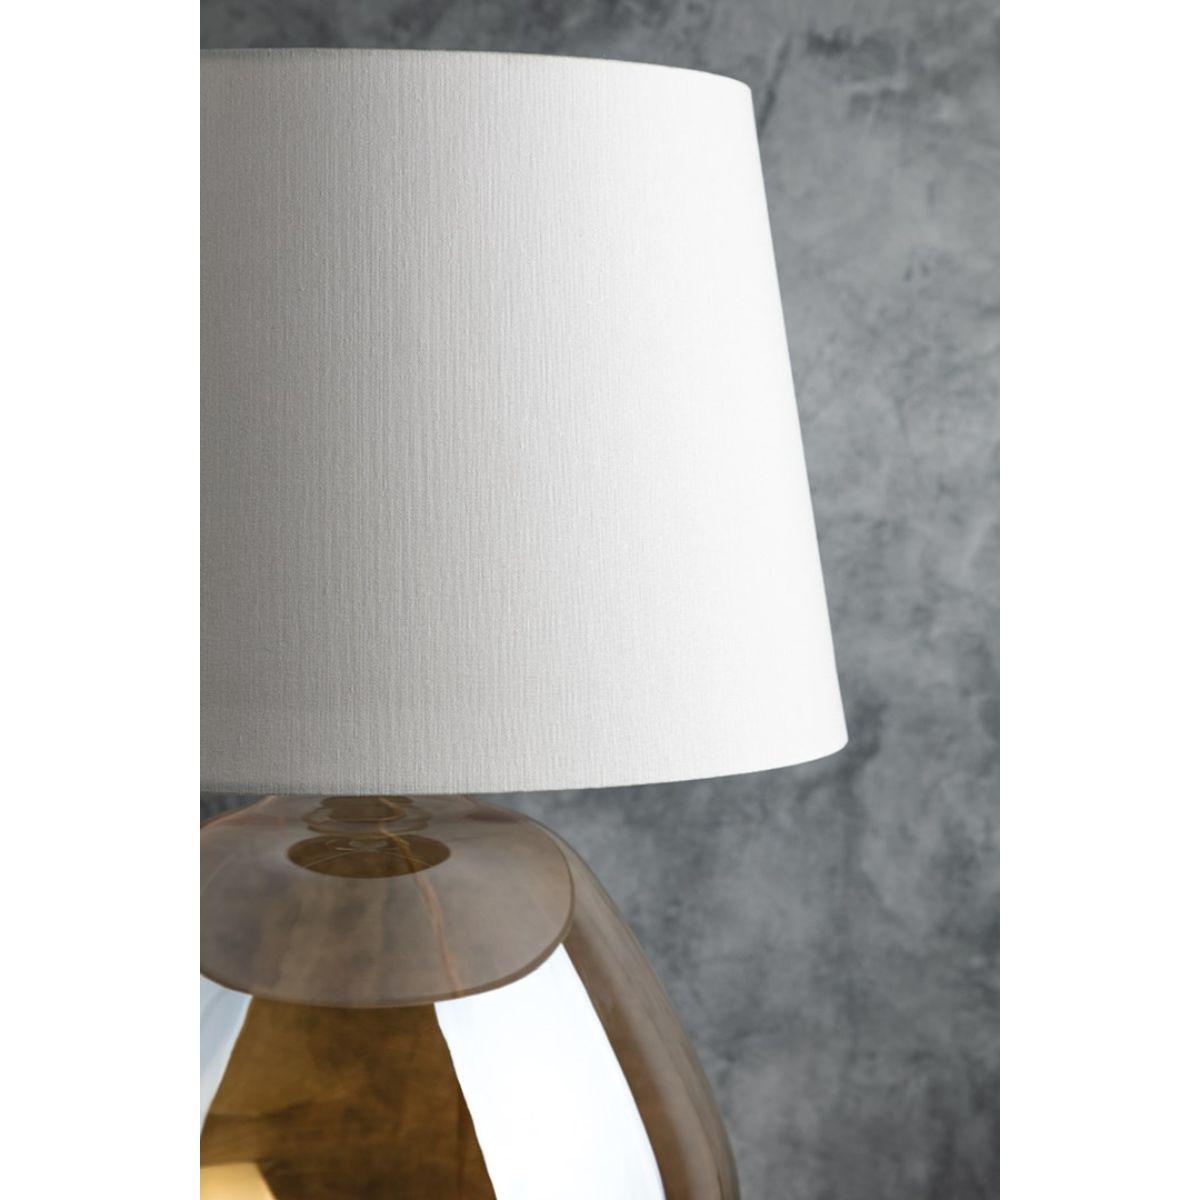 Thea Table Lamp Champagne Amber Glass with Aged Brass Accents